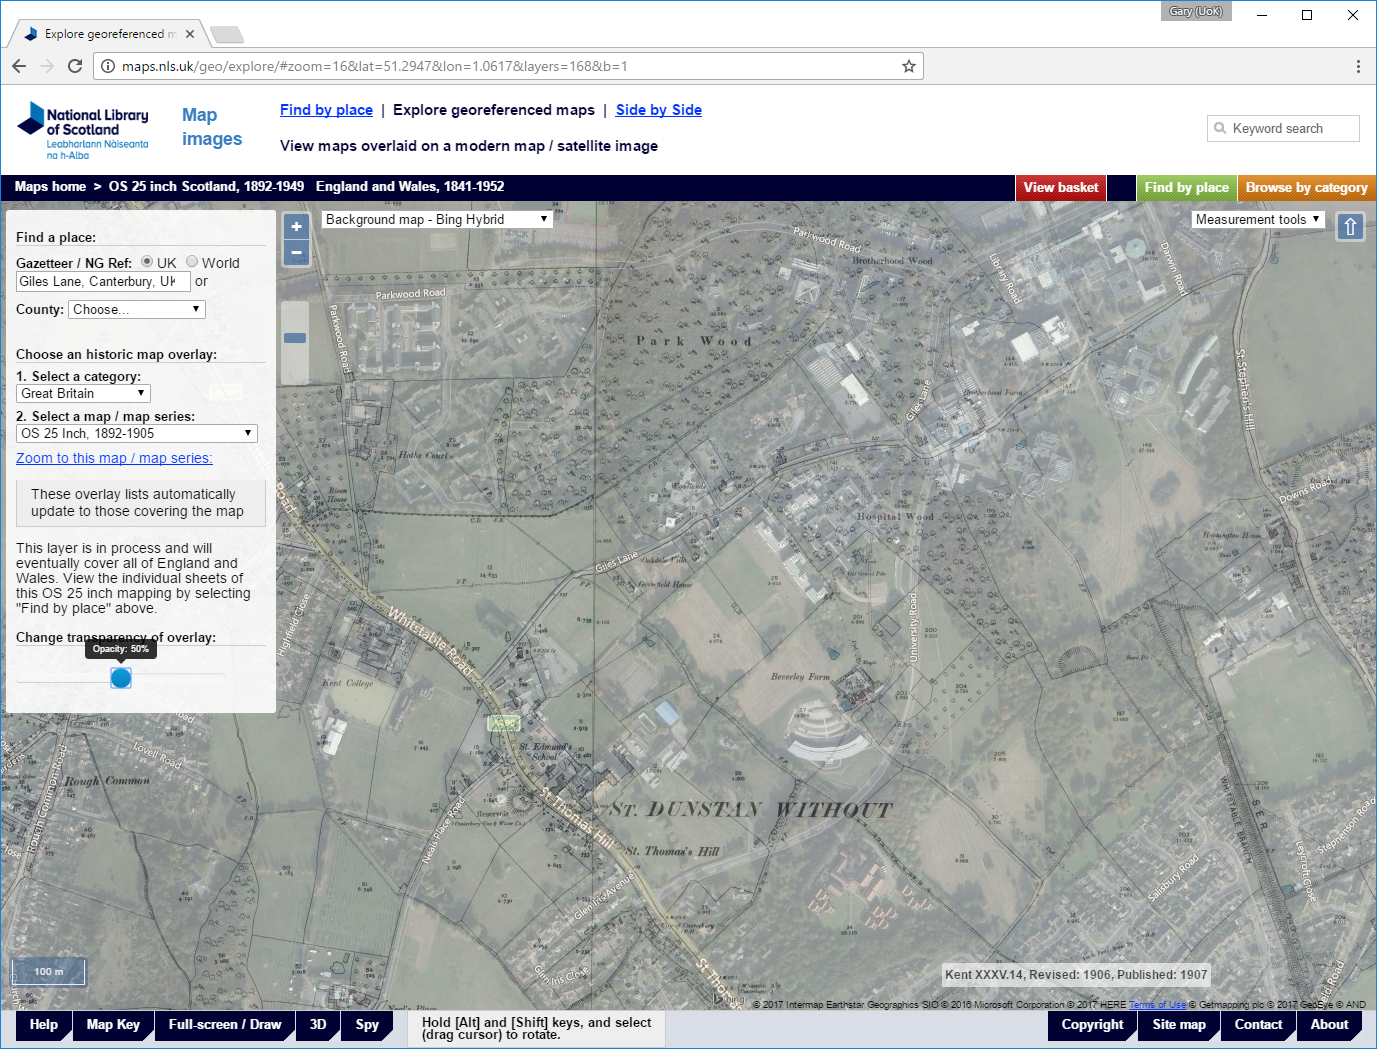 National Library of Scotland Georeferenced Map